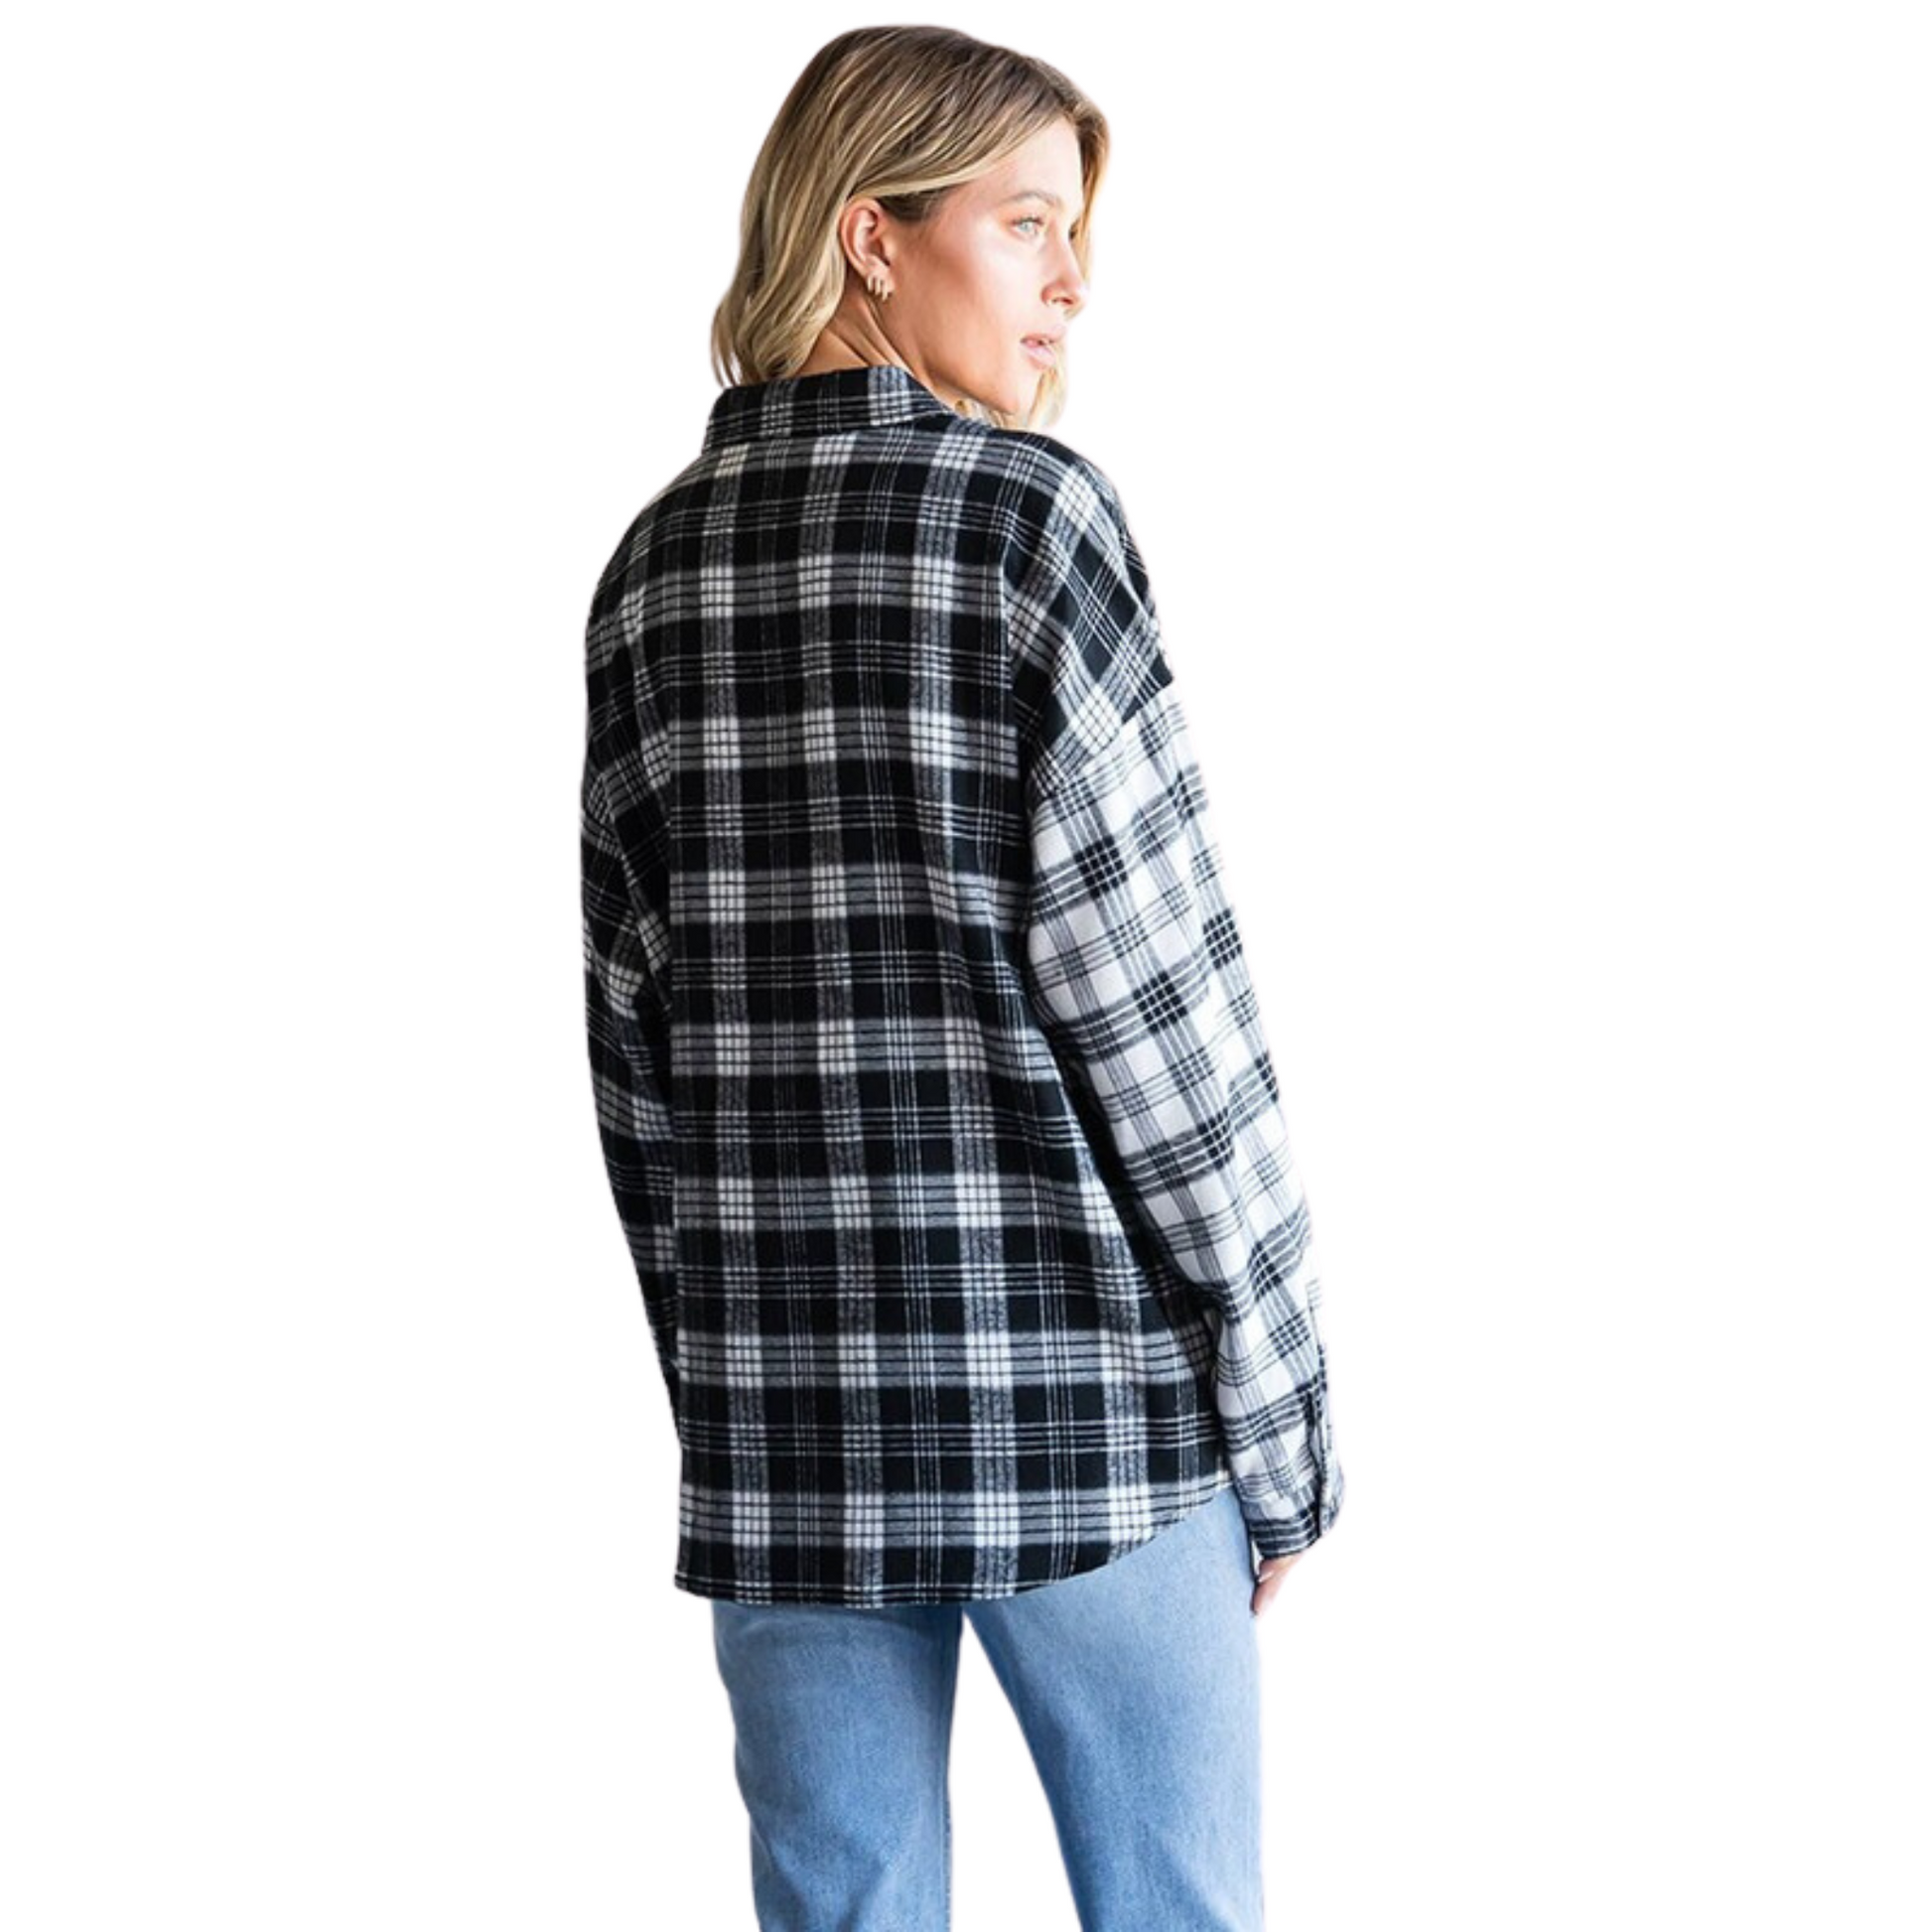 This collared, button-up shirt offers a classic look for any occasion. The black and white checkered pattern makes for an updated look, perfect for any wardrobe. It pairs perfectly with jeans or dress pants, making it easy to match with any outfit.